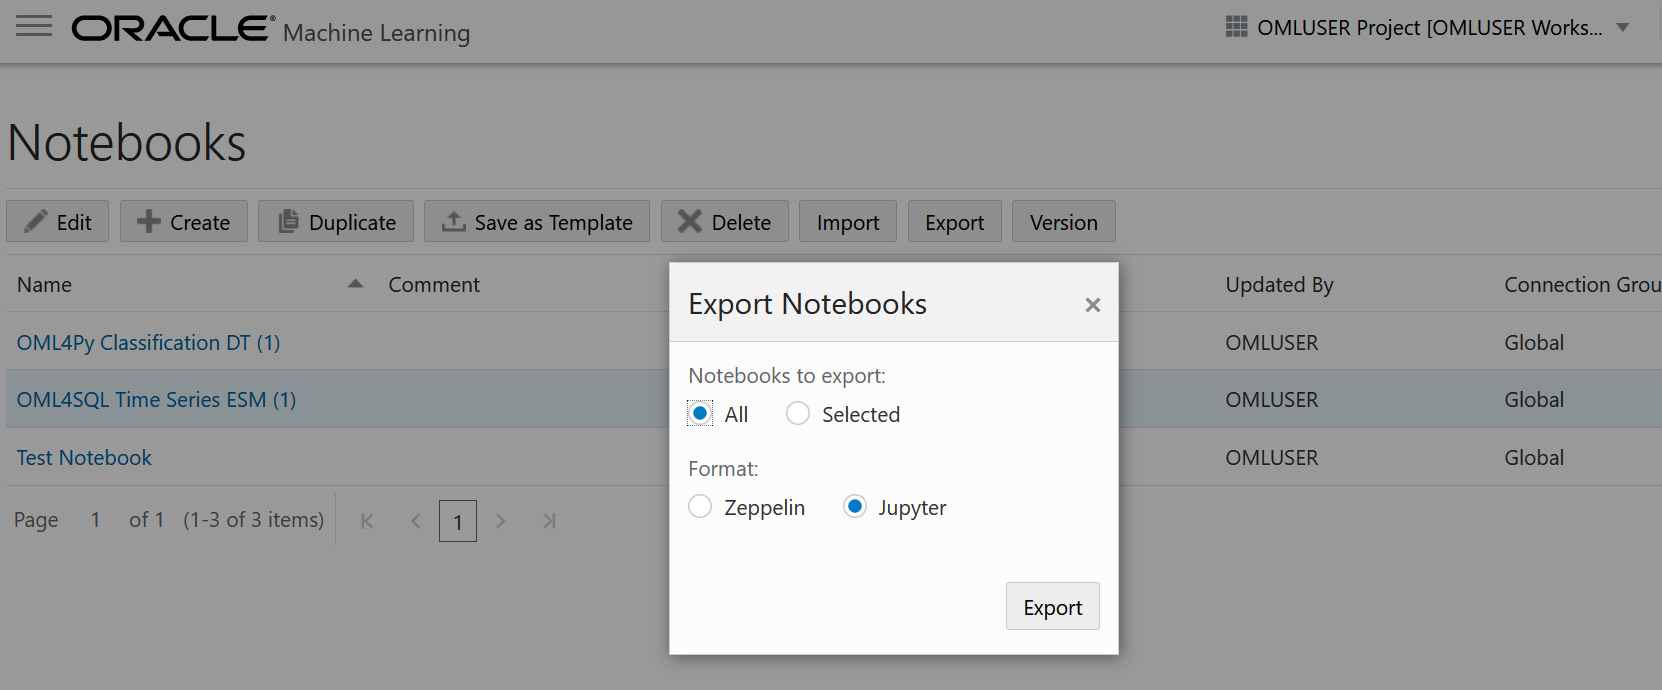 Supported Notebook Formats for Export